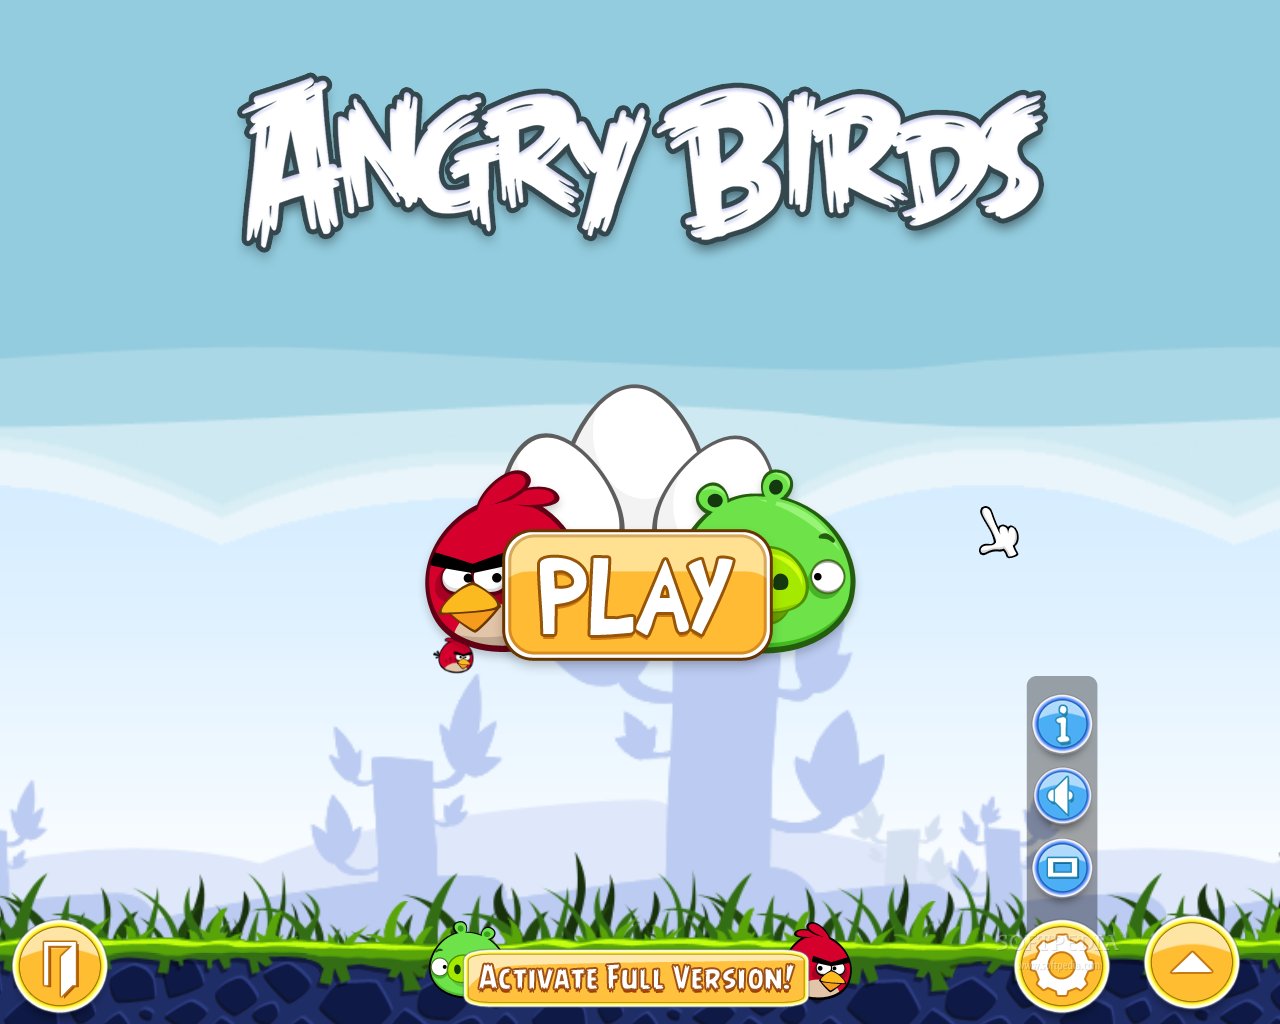 download angry bird